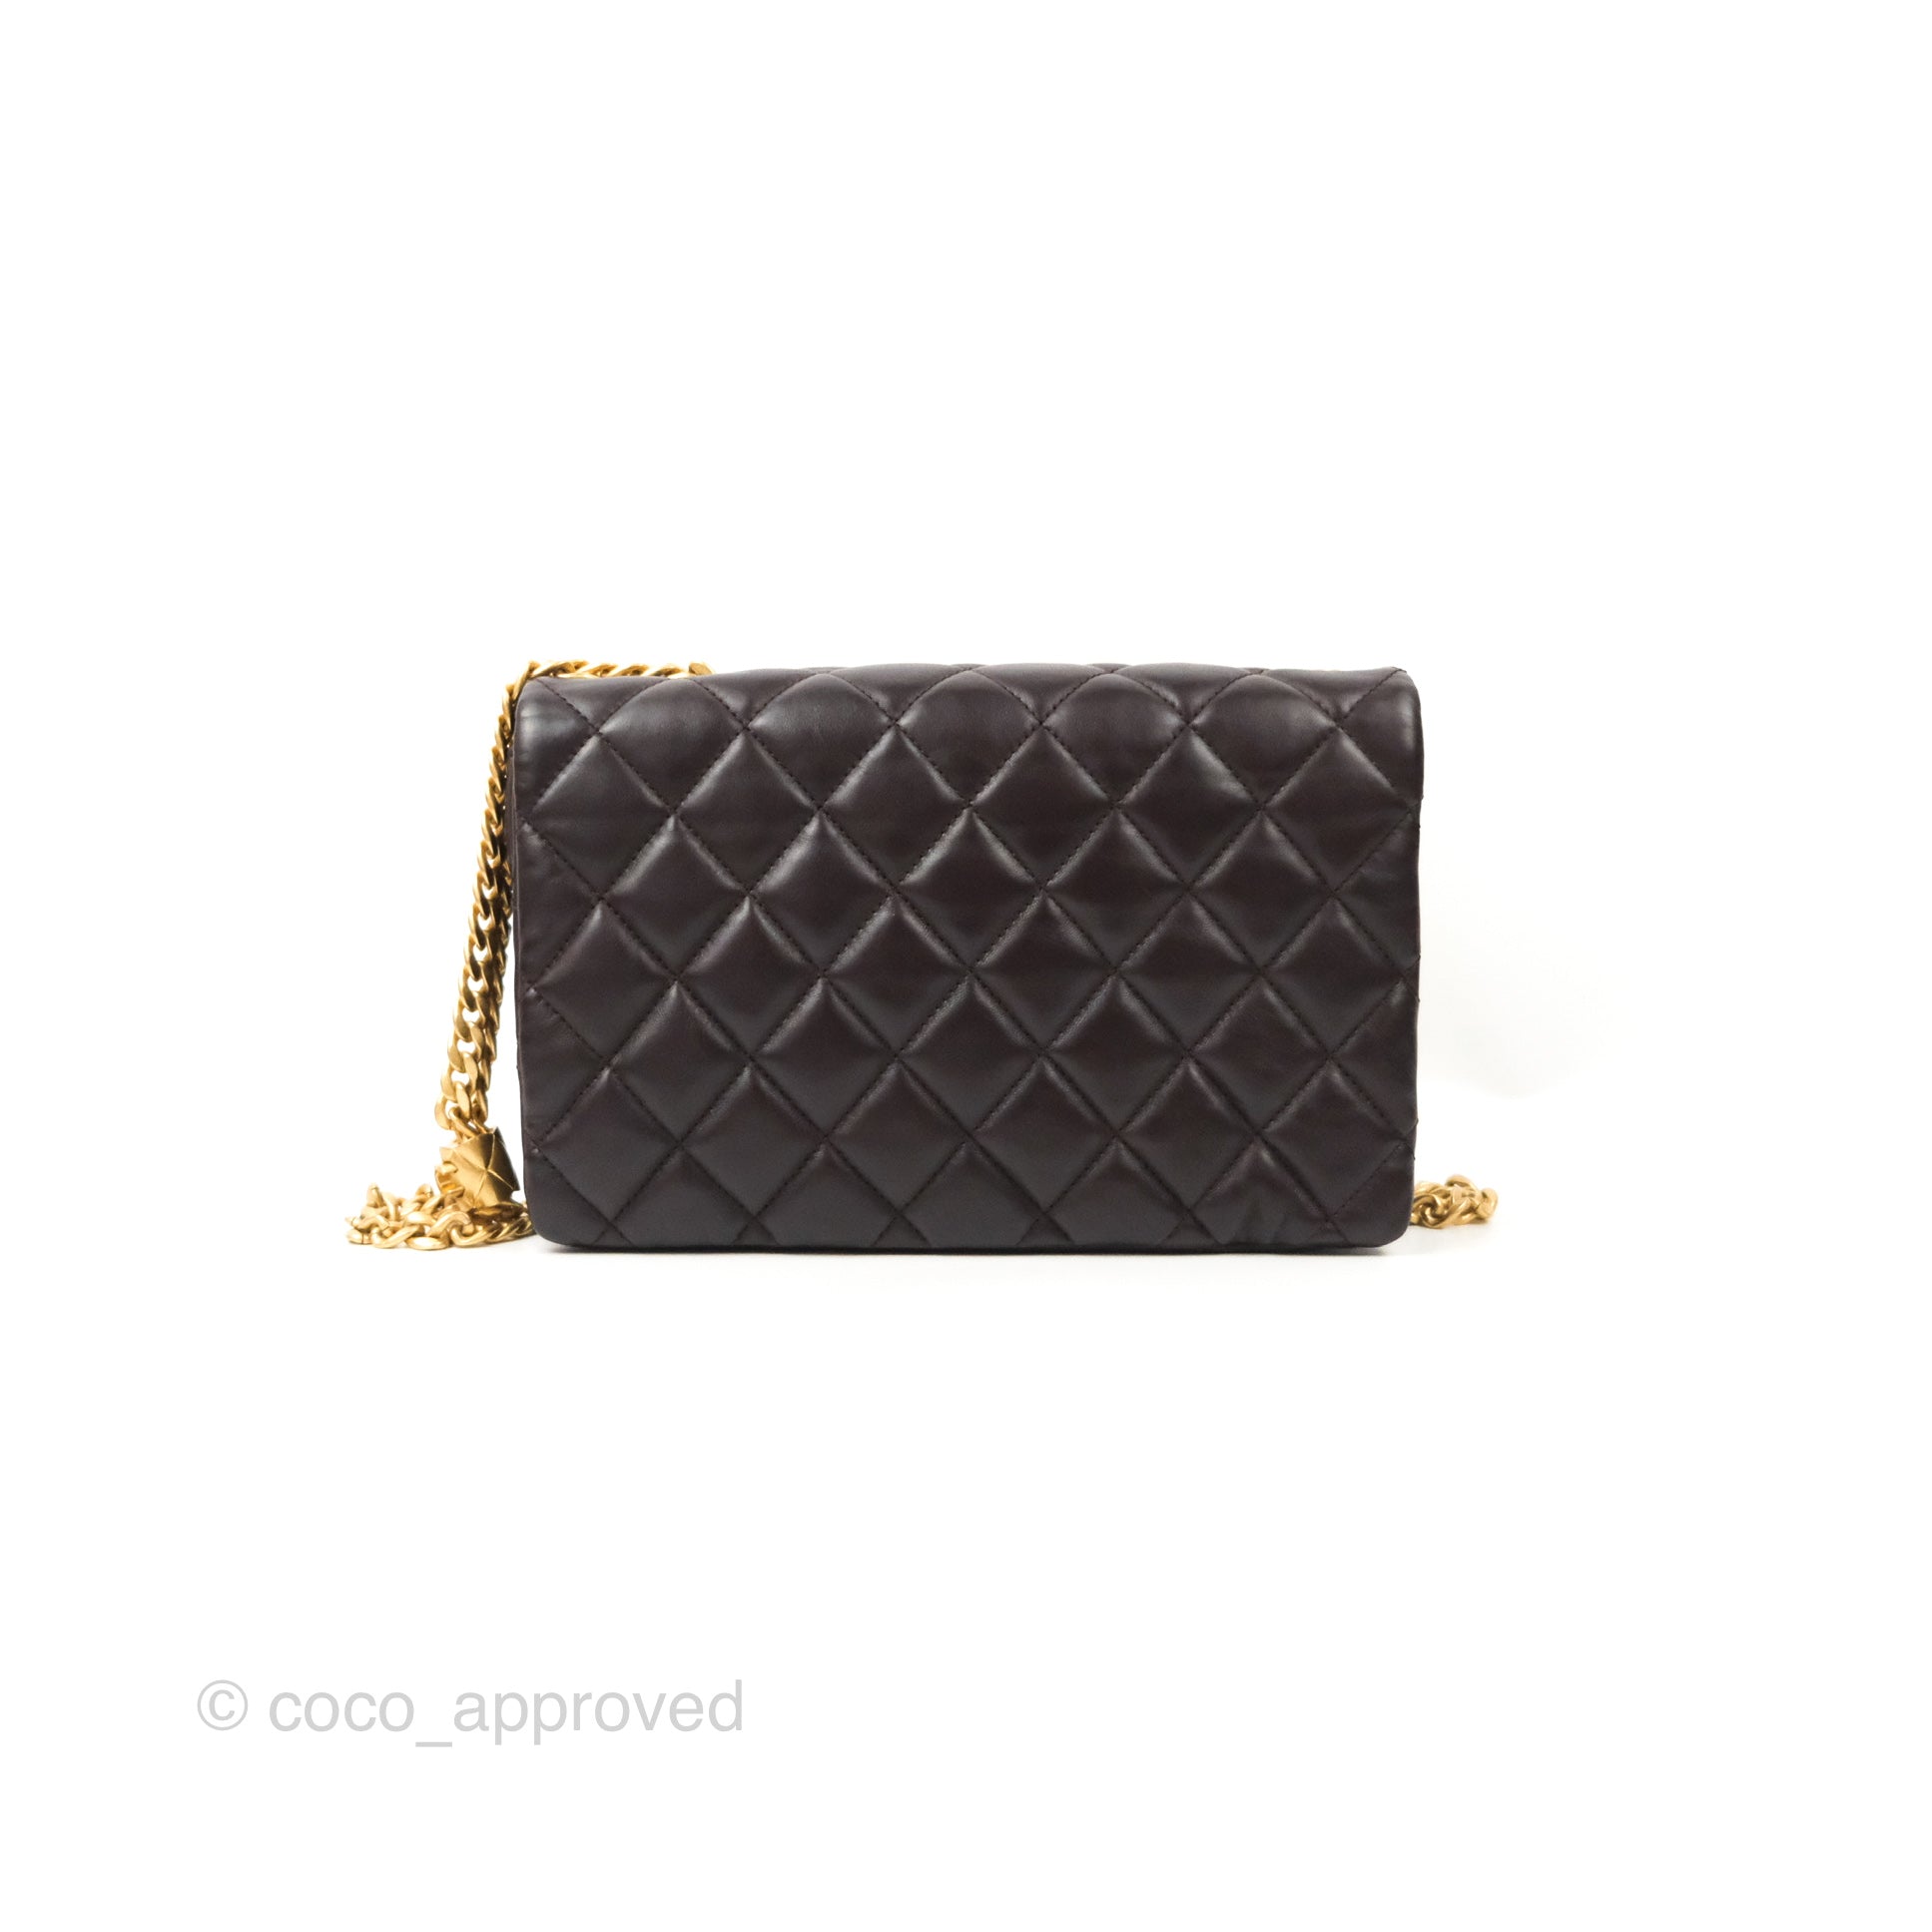 Chanel 19 - 1,144 For Sale on 1stDibs